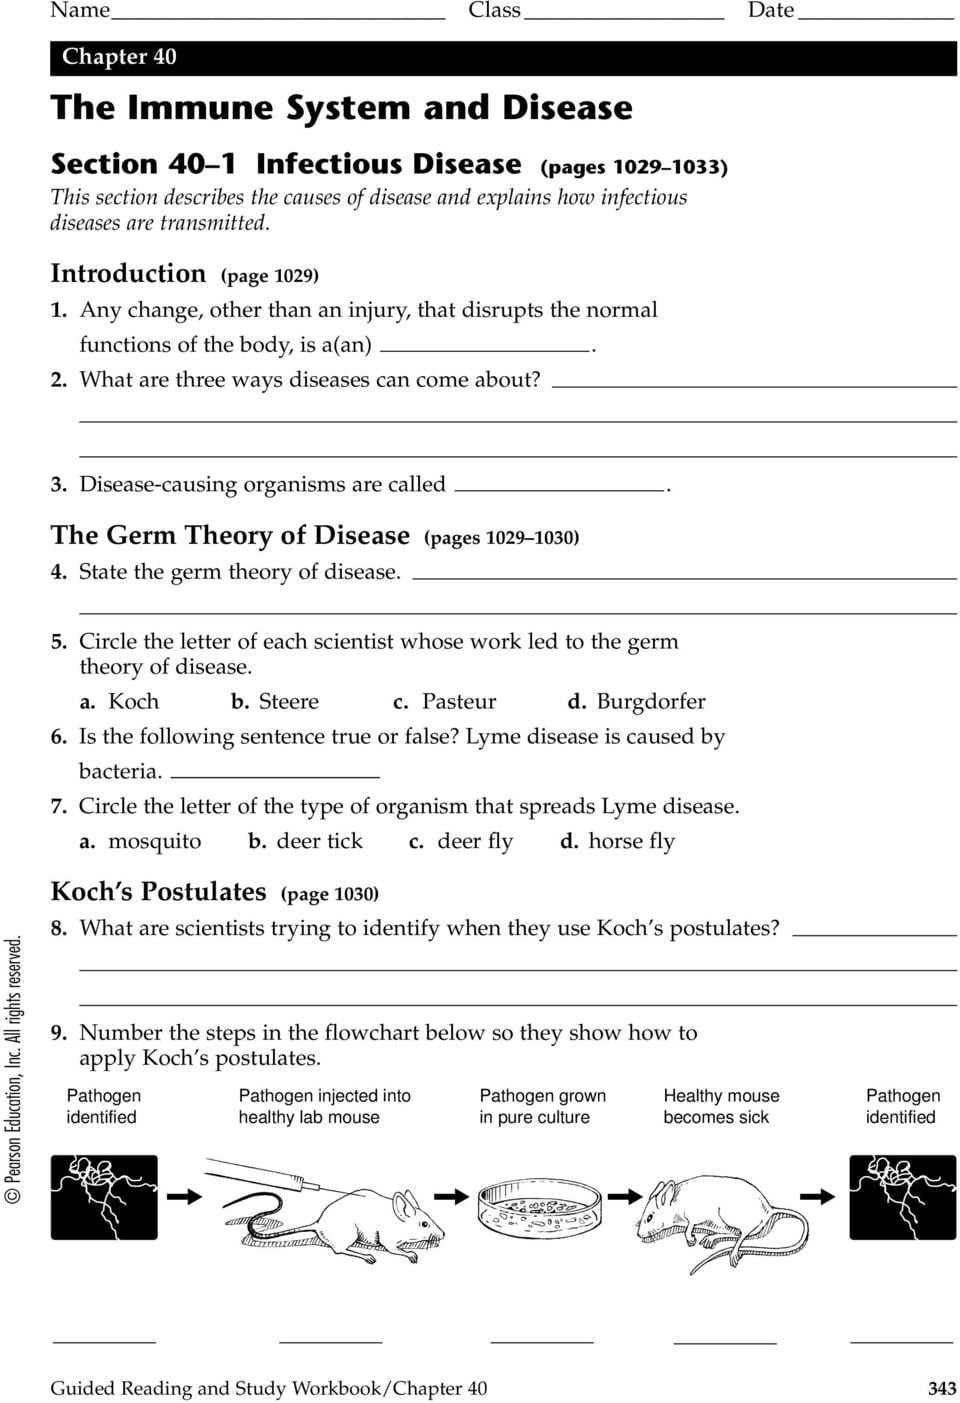 The Immune System And Disease  Pdf As Well As Immune System Worksheets For 5Th Grade